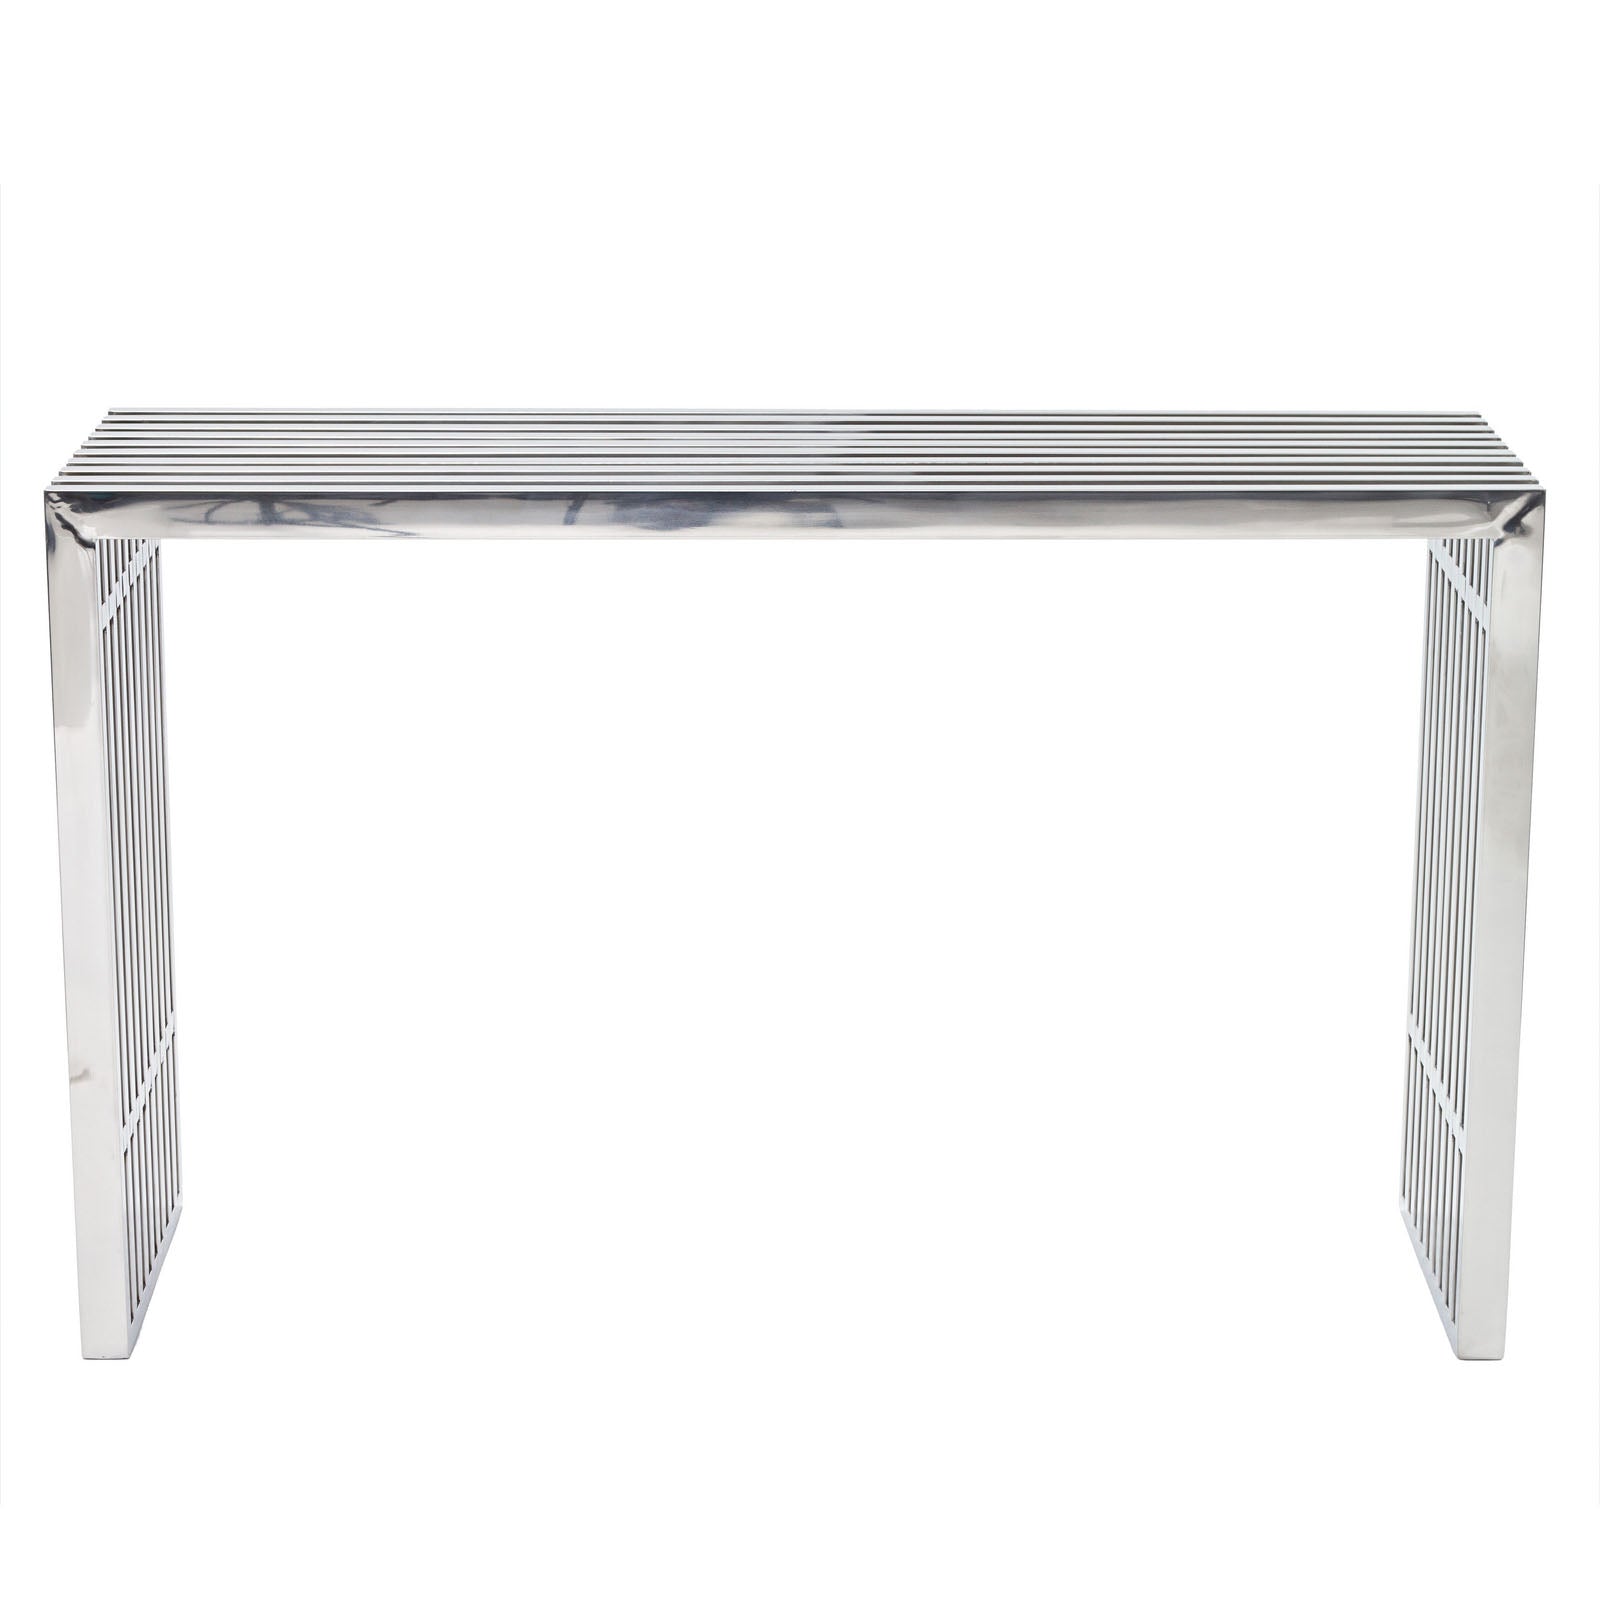 Gridiron Console Table - East Shore Modern Home Furnishings